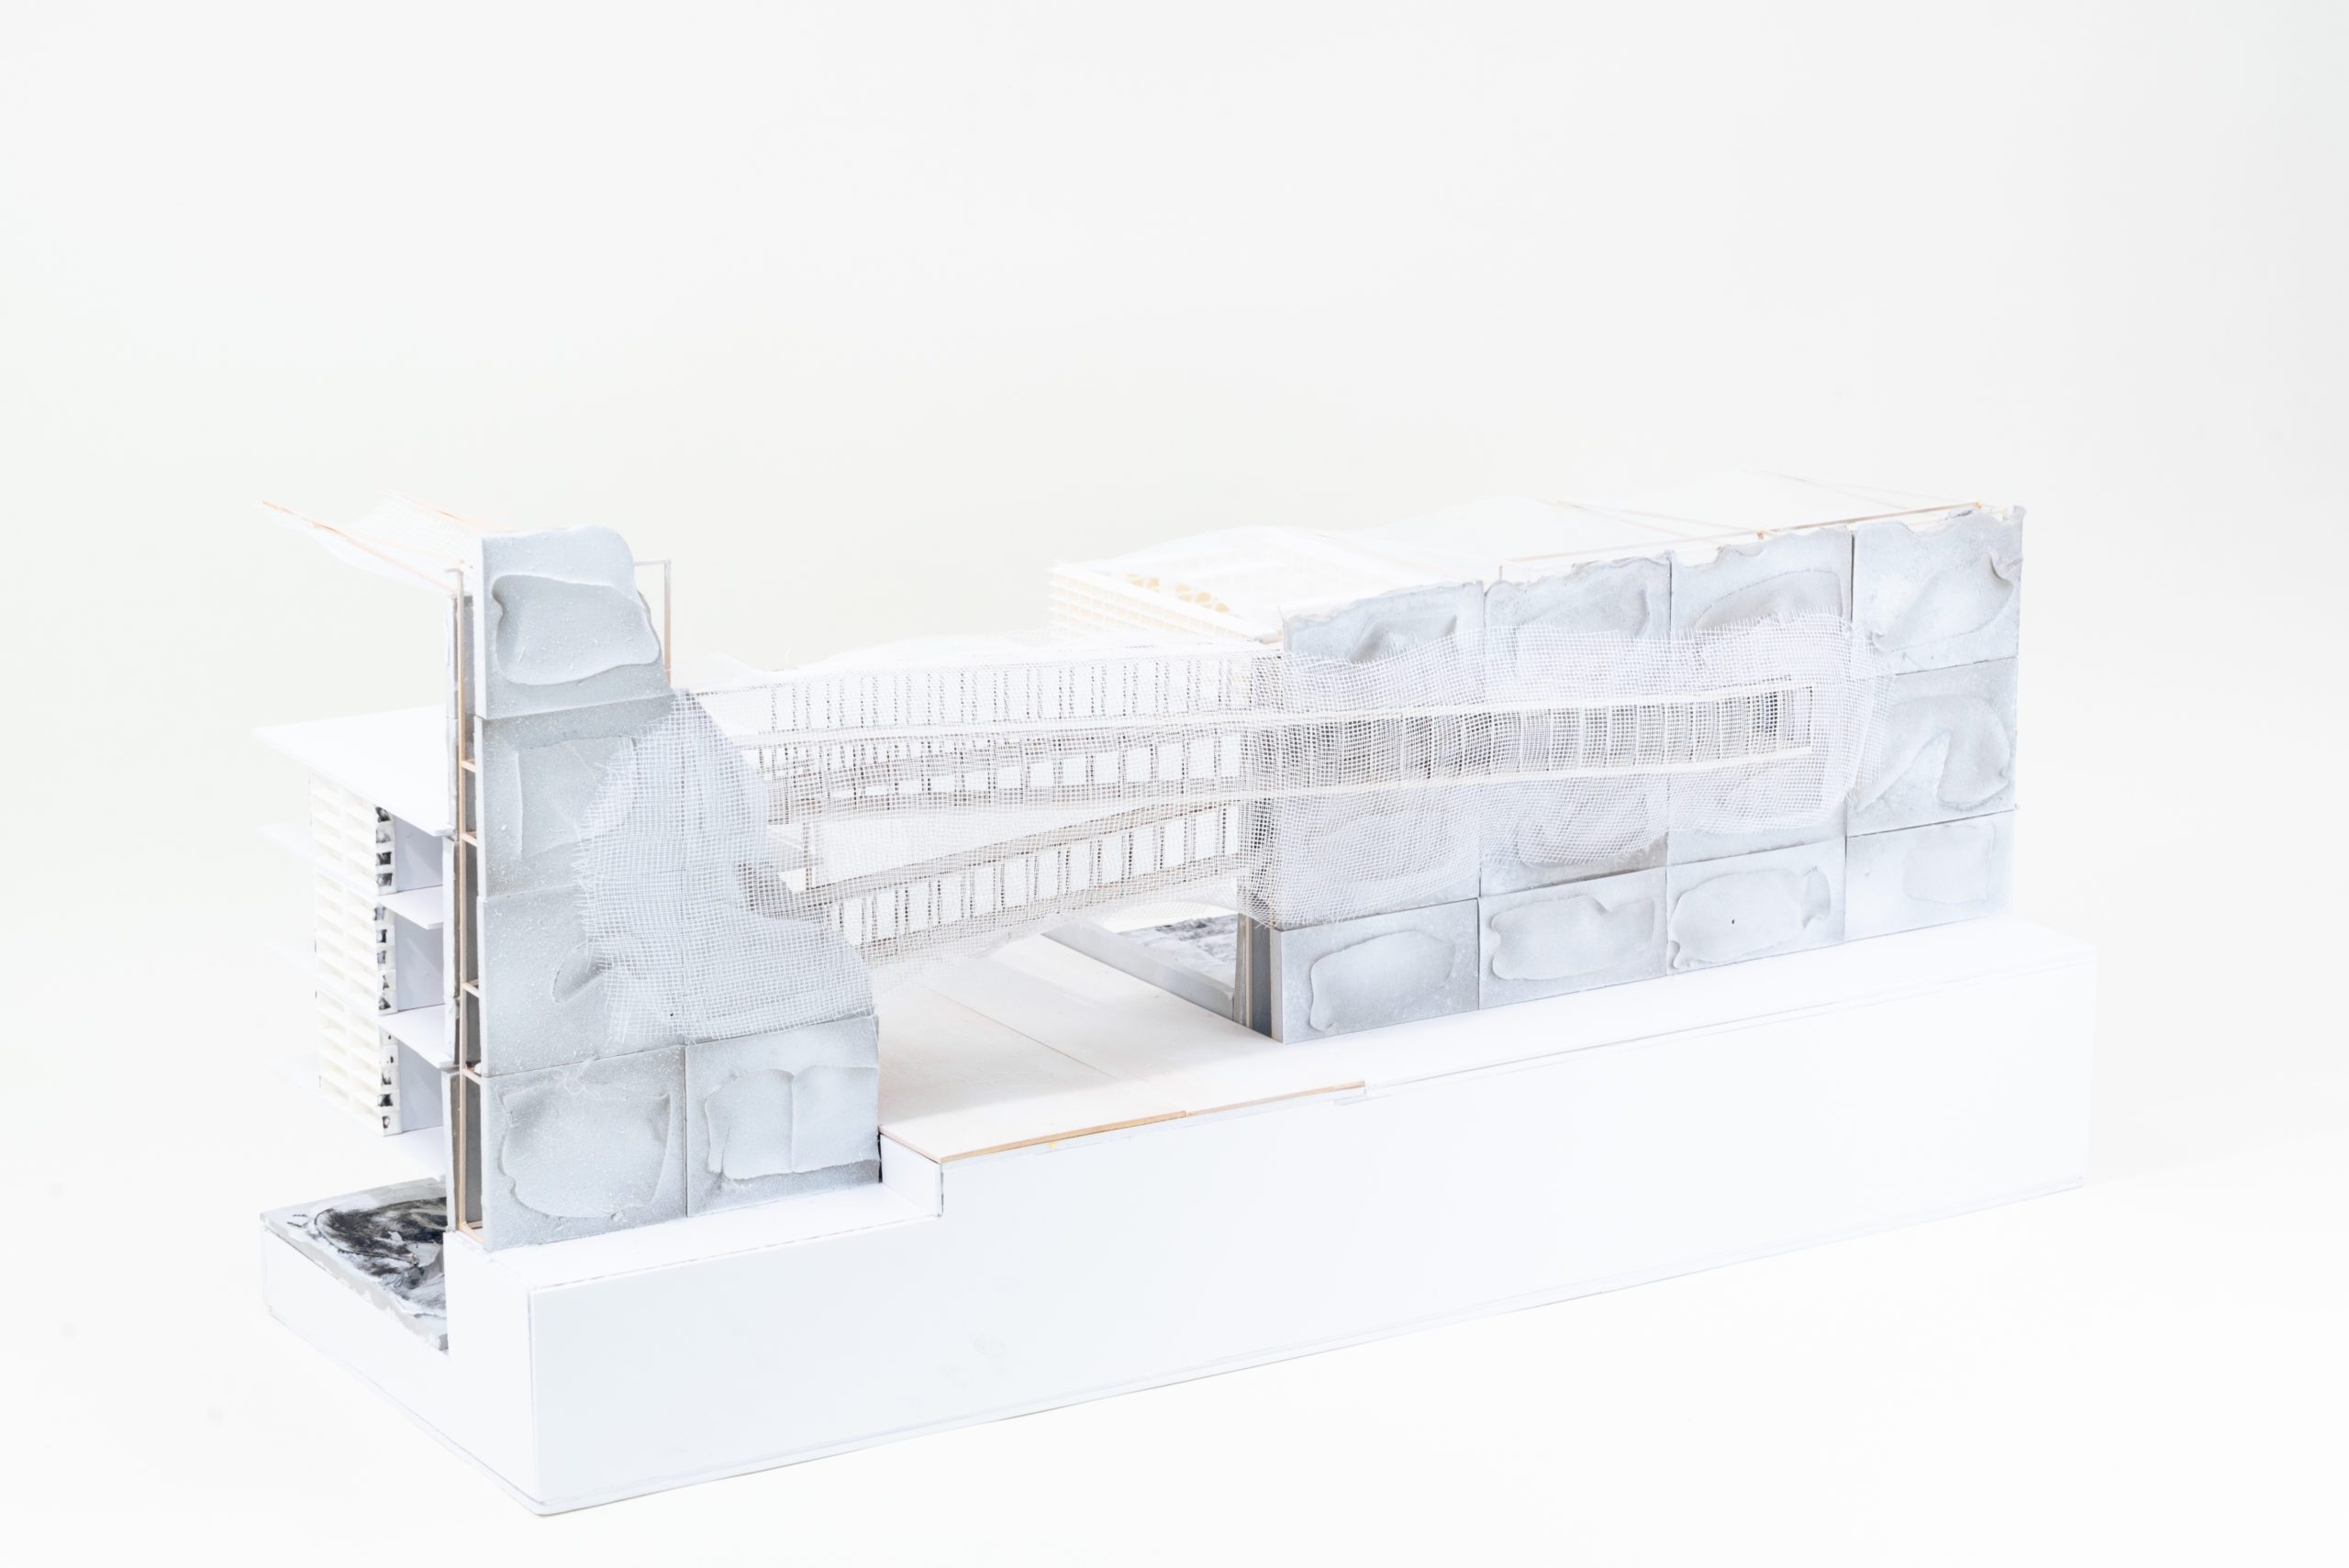 Full view of architecture model